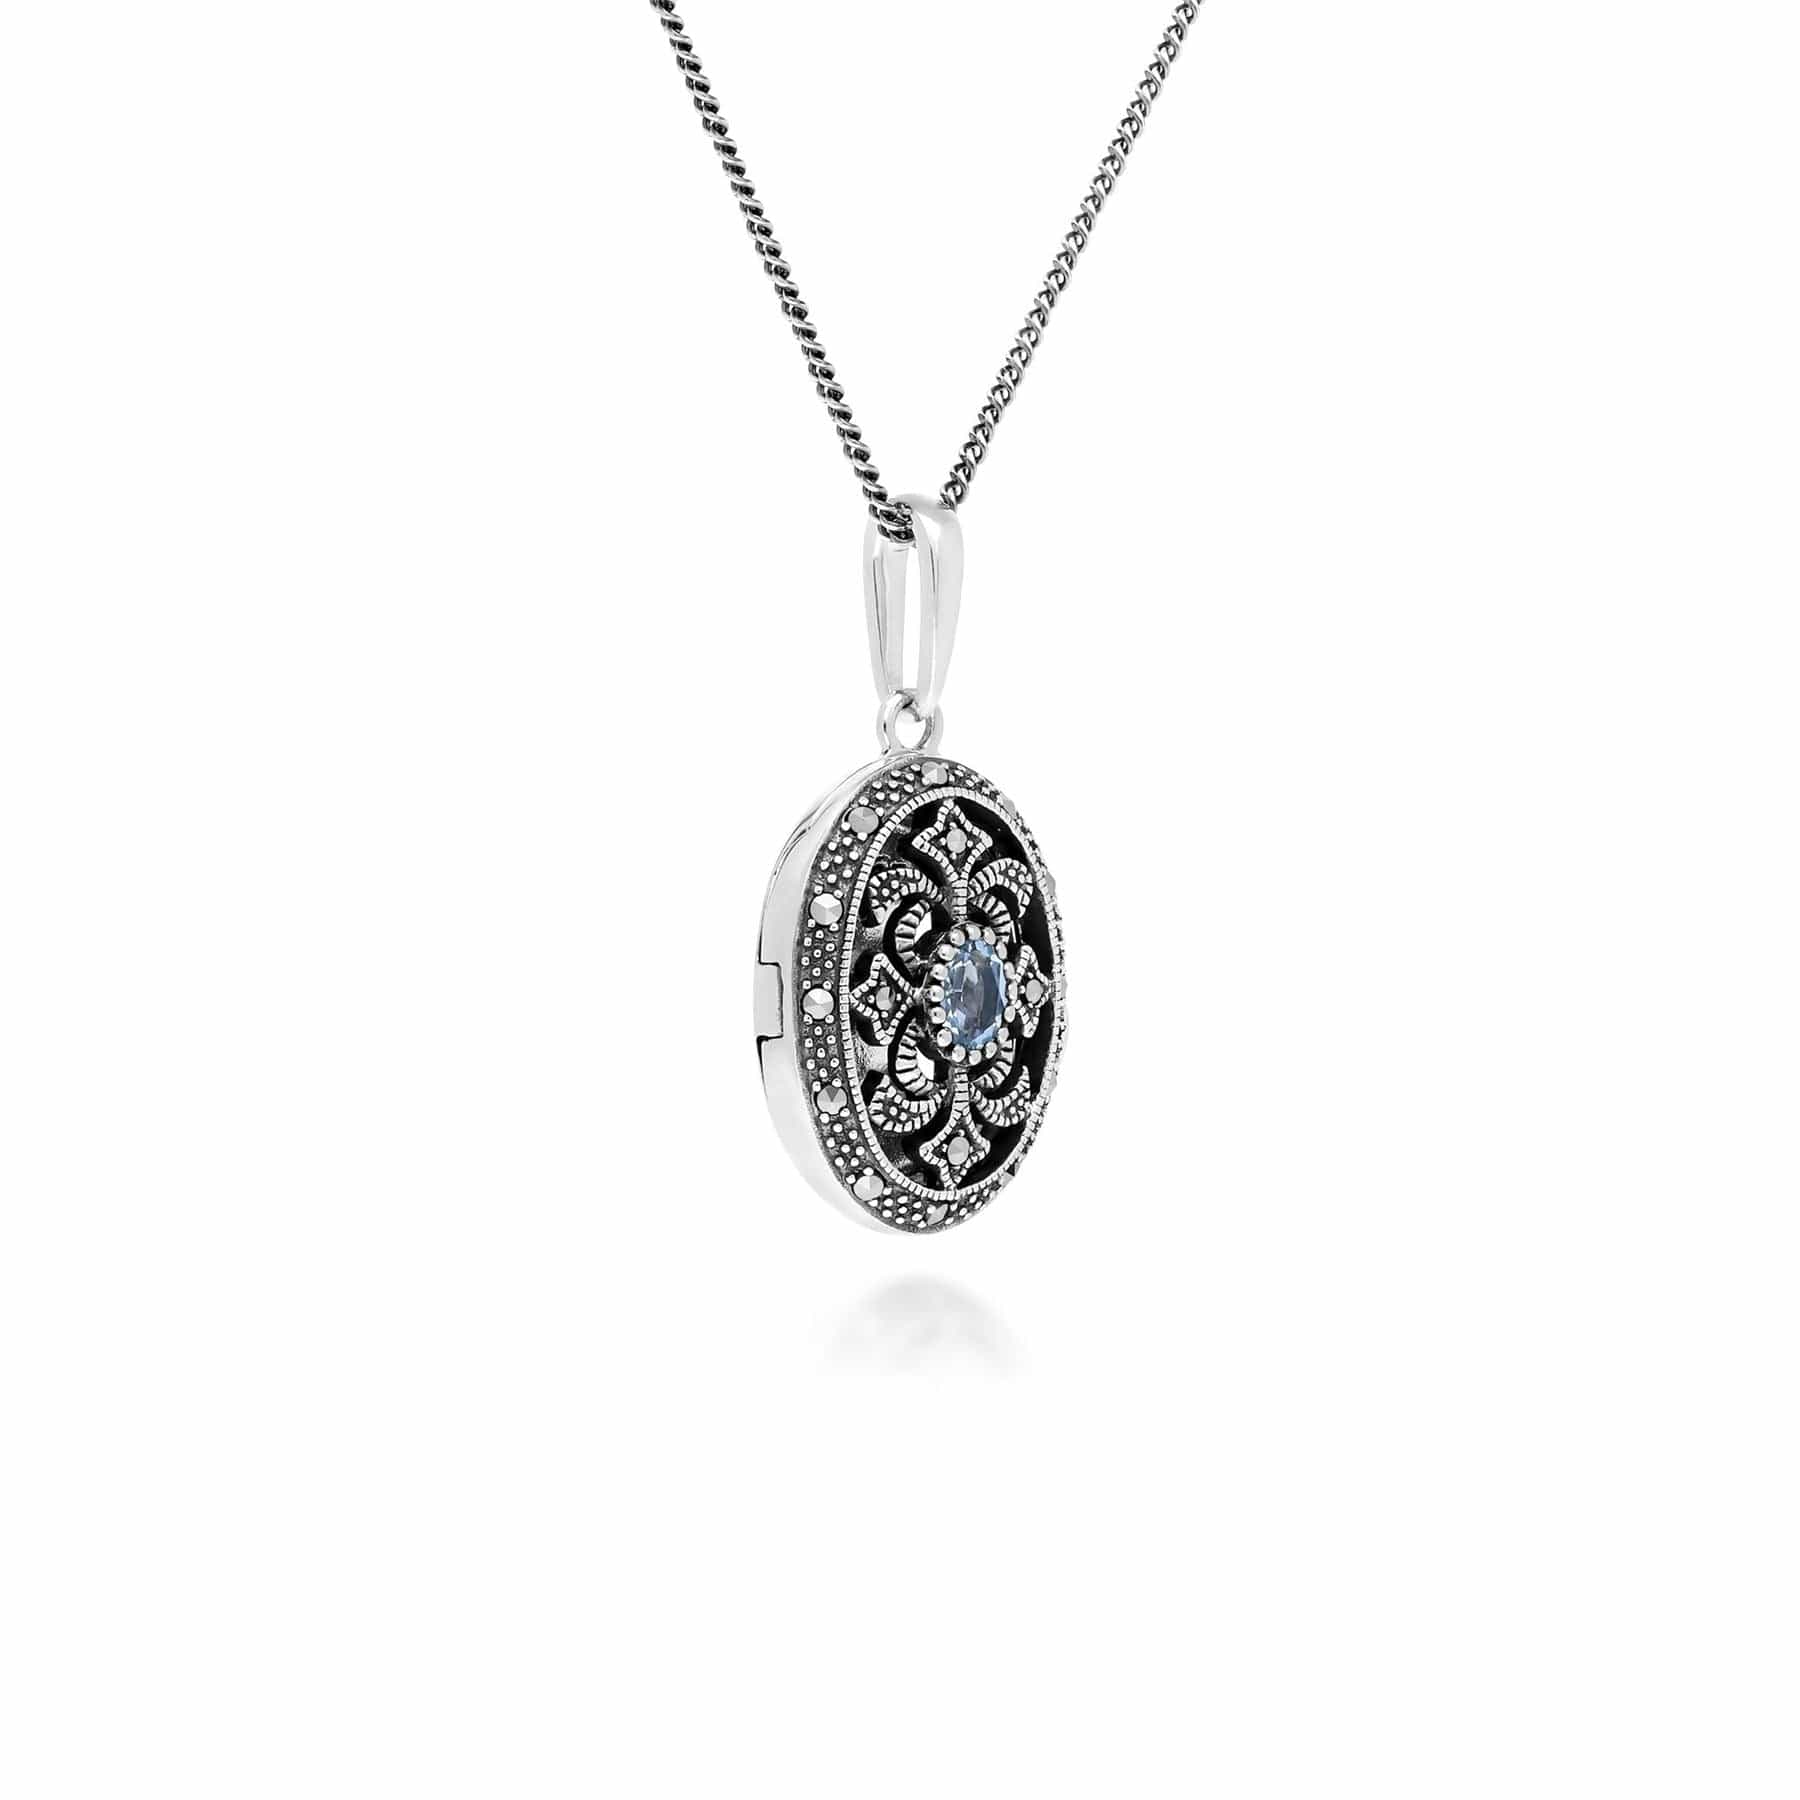 214N716208925 Art Nouveau Style Oval Topaz & Marcasite Locket Necklace in 925 Sterling Silver 2